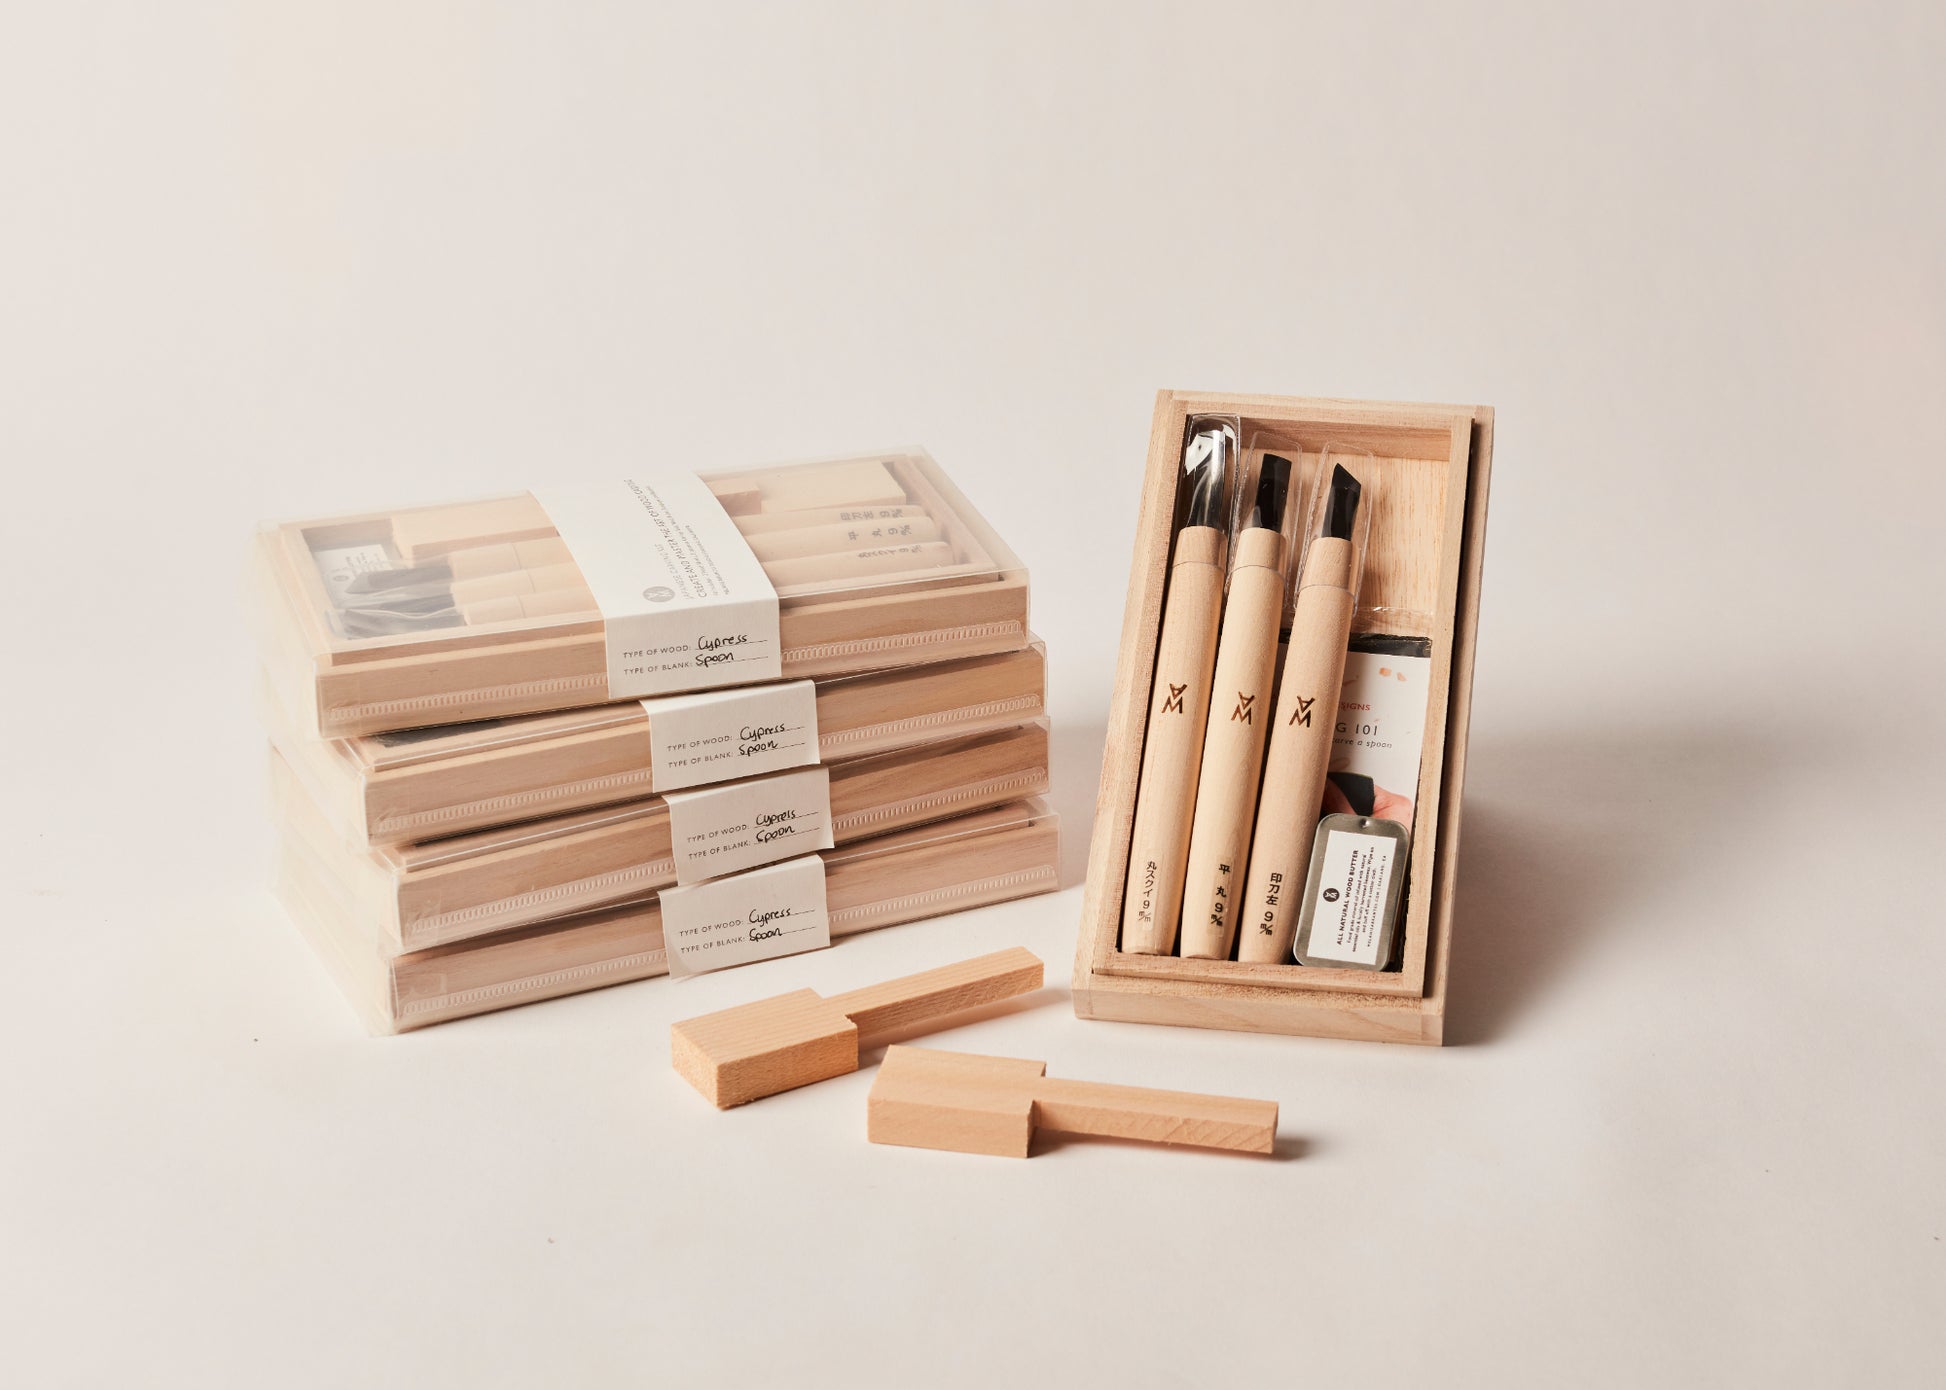 Group Carving Kit Sets: Great for Parties, Team-builds and More